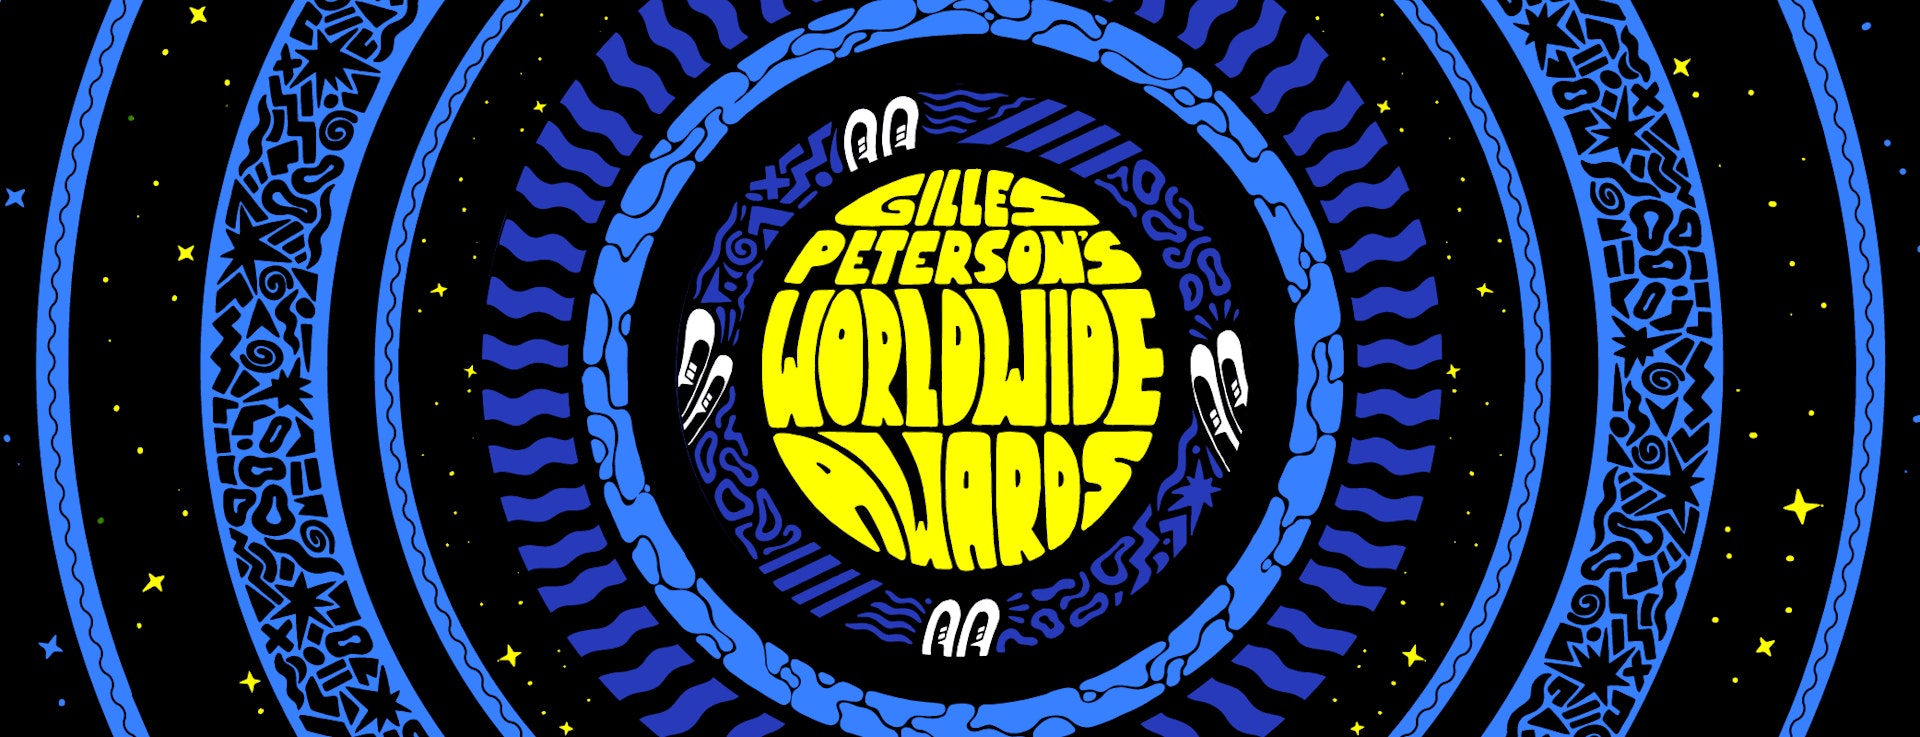 First acts announced for Gilles Peterson’s Worldwide Awards